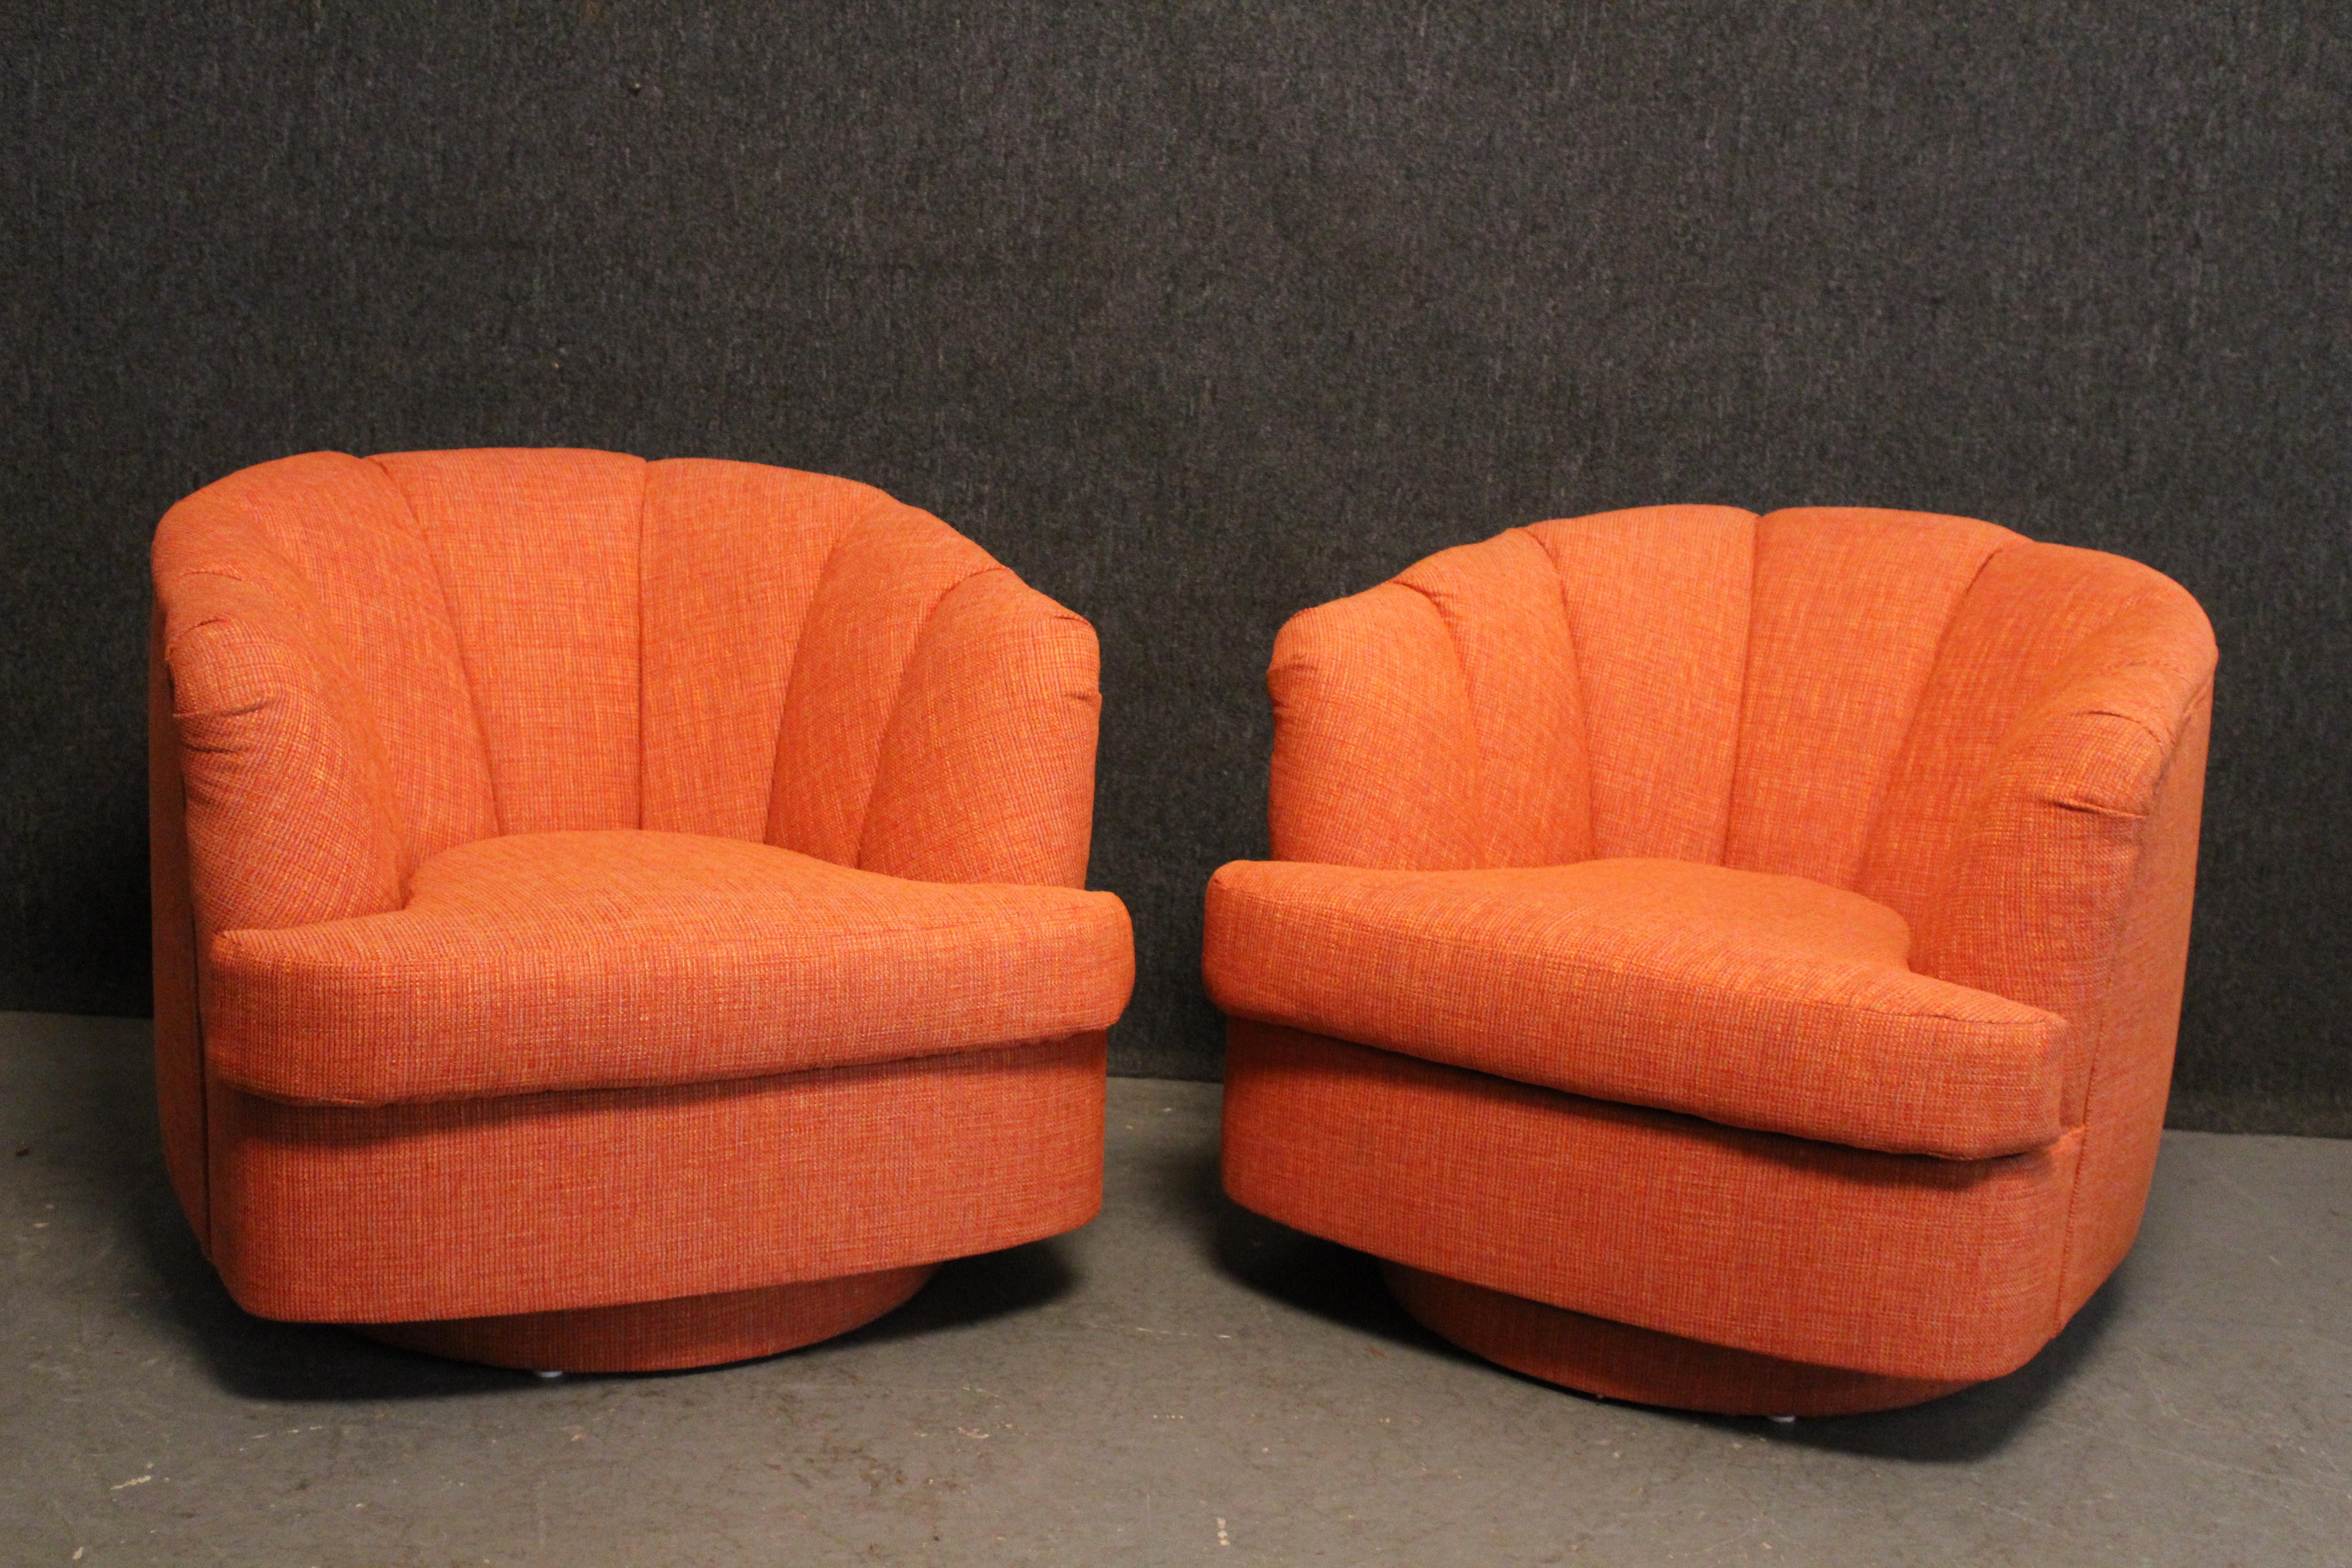 20th Century Reupholstered Mid-Century Swivel Chairs by Directional Furniture For Sale